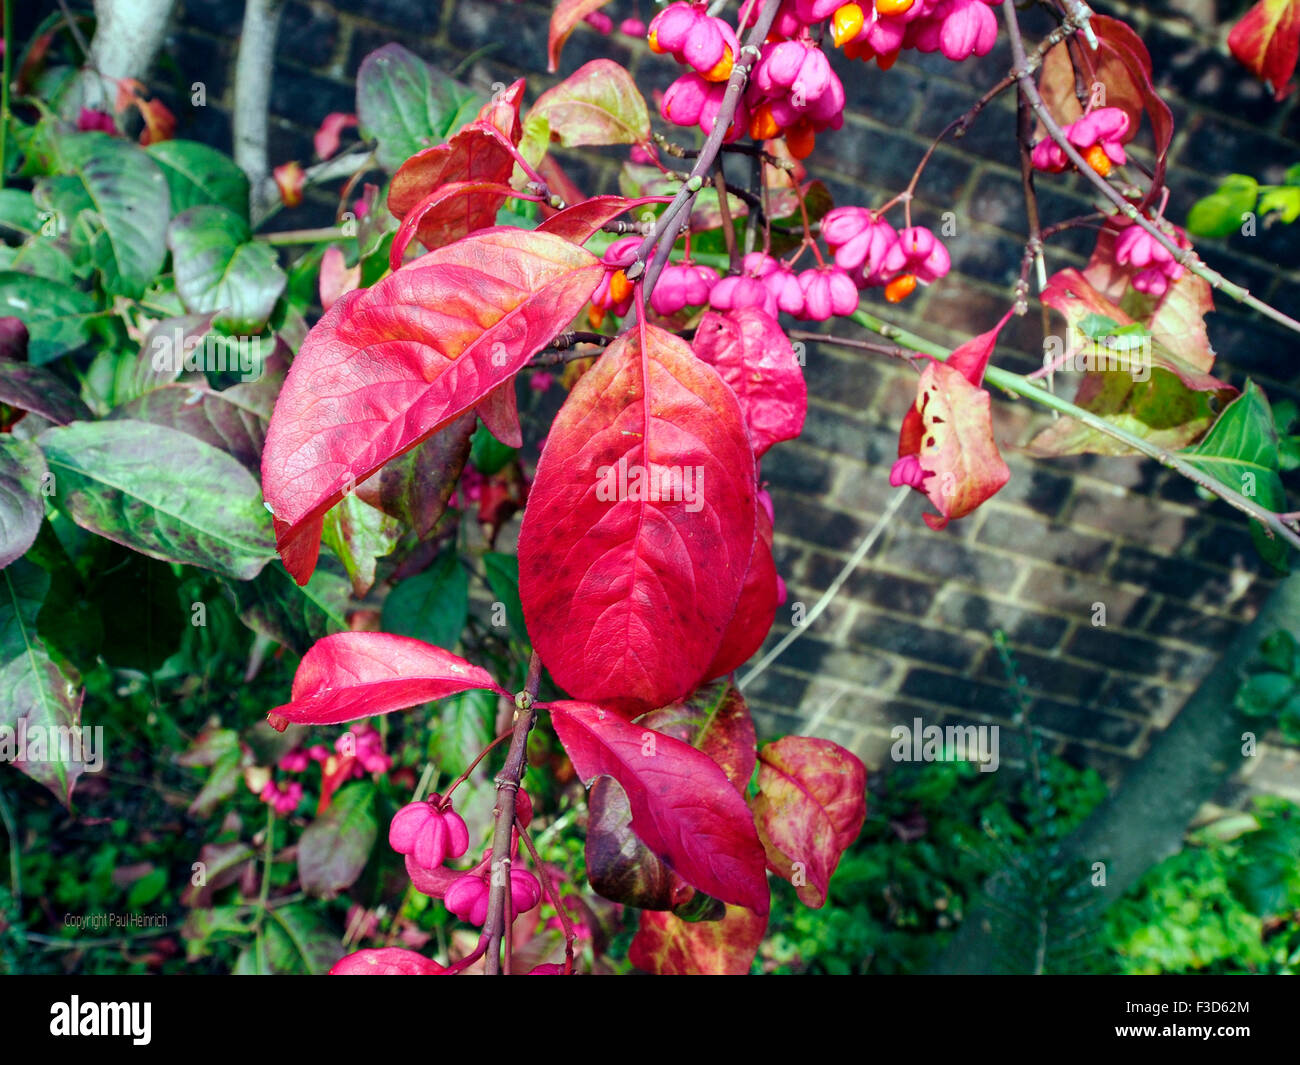 Euonymus europaeus (spindle, European spindle, common spindle) autumn leaves and bursting seed pods. Stock Photo